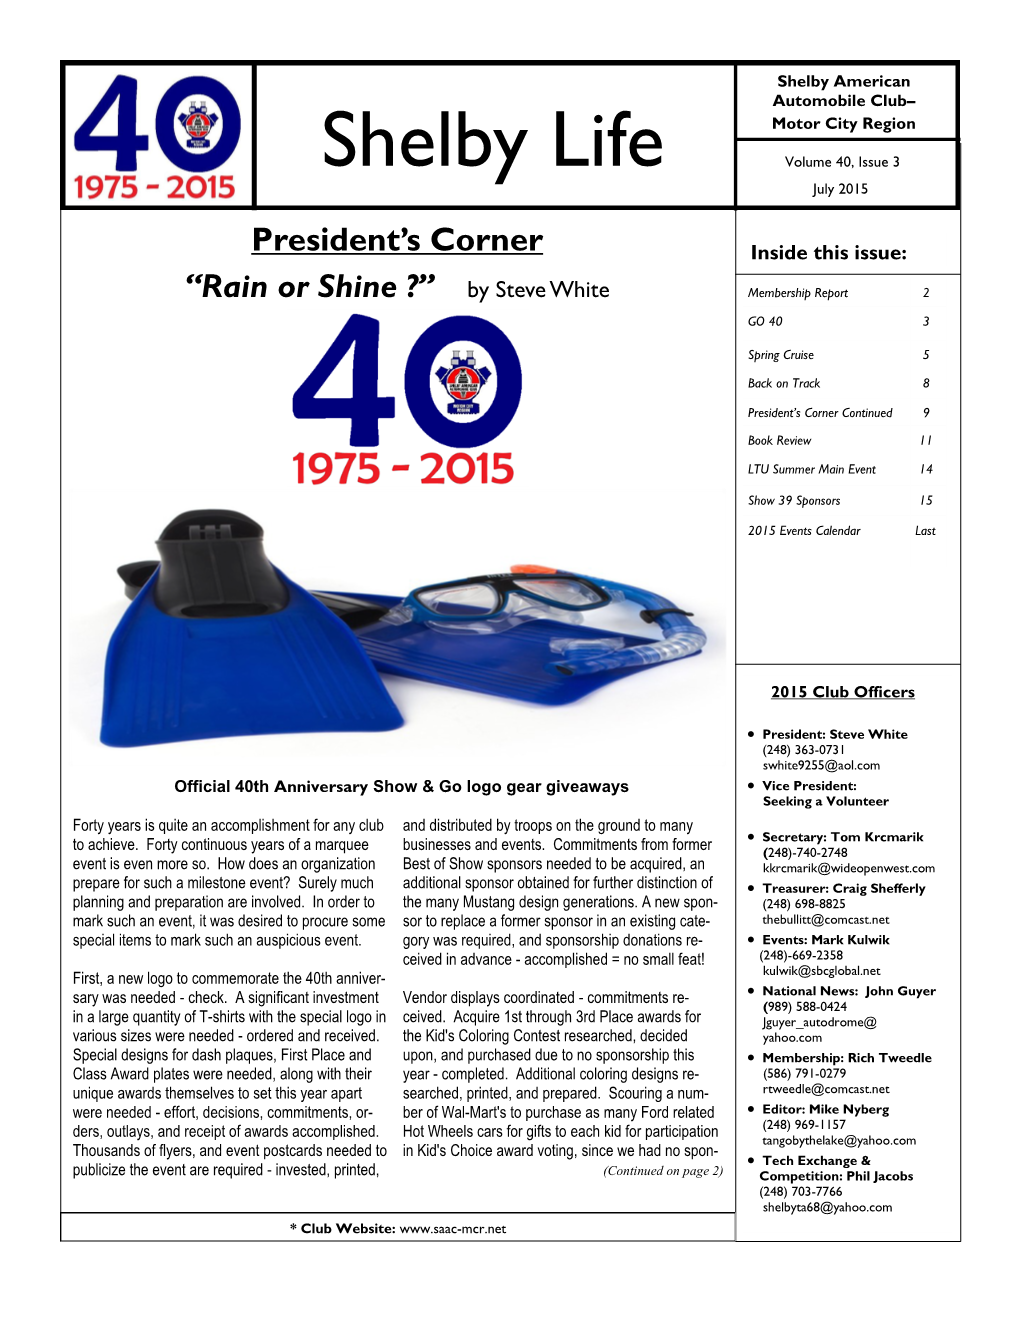 Shelby Life Volume 40, Issue 3 July 2015